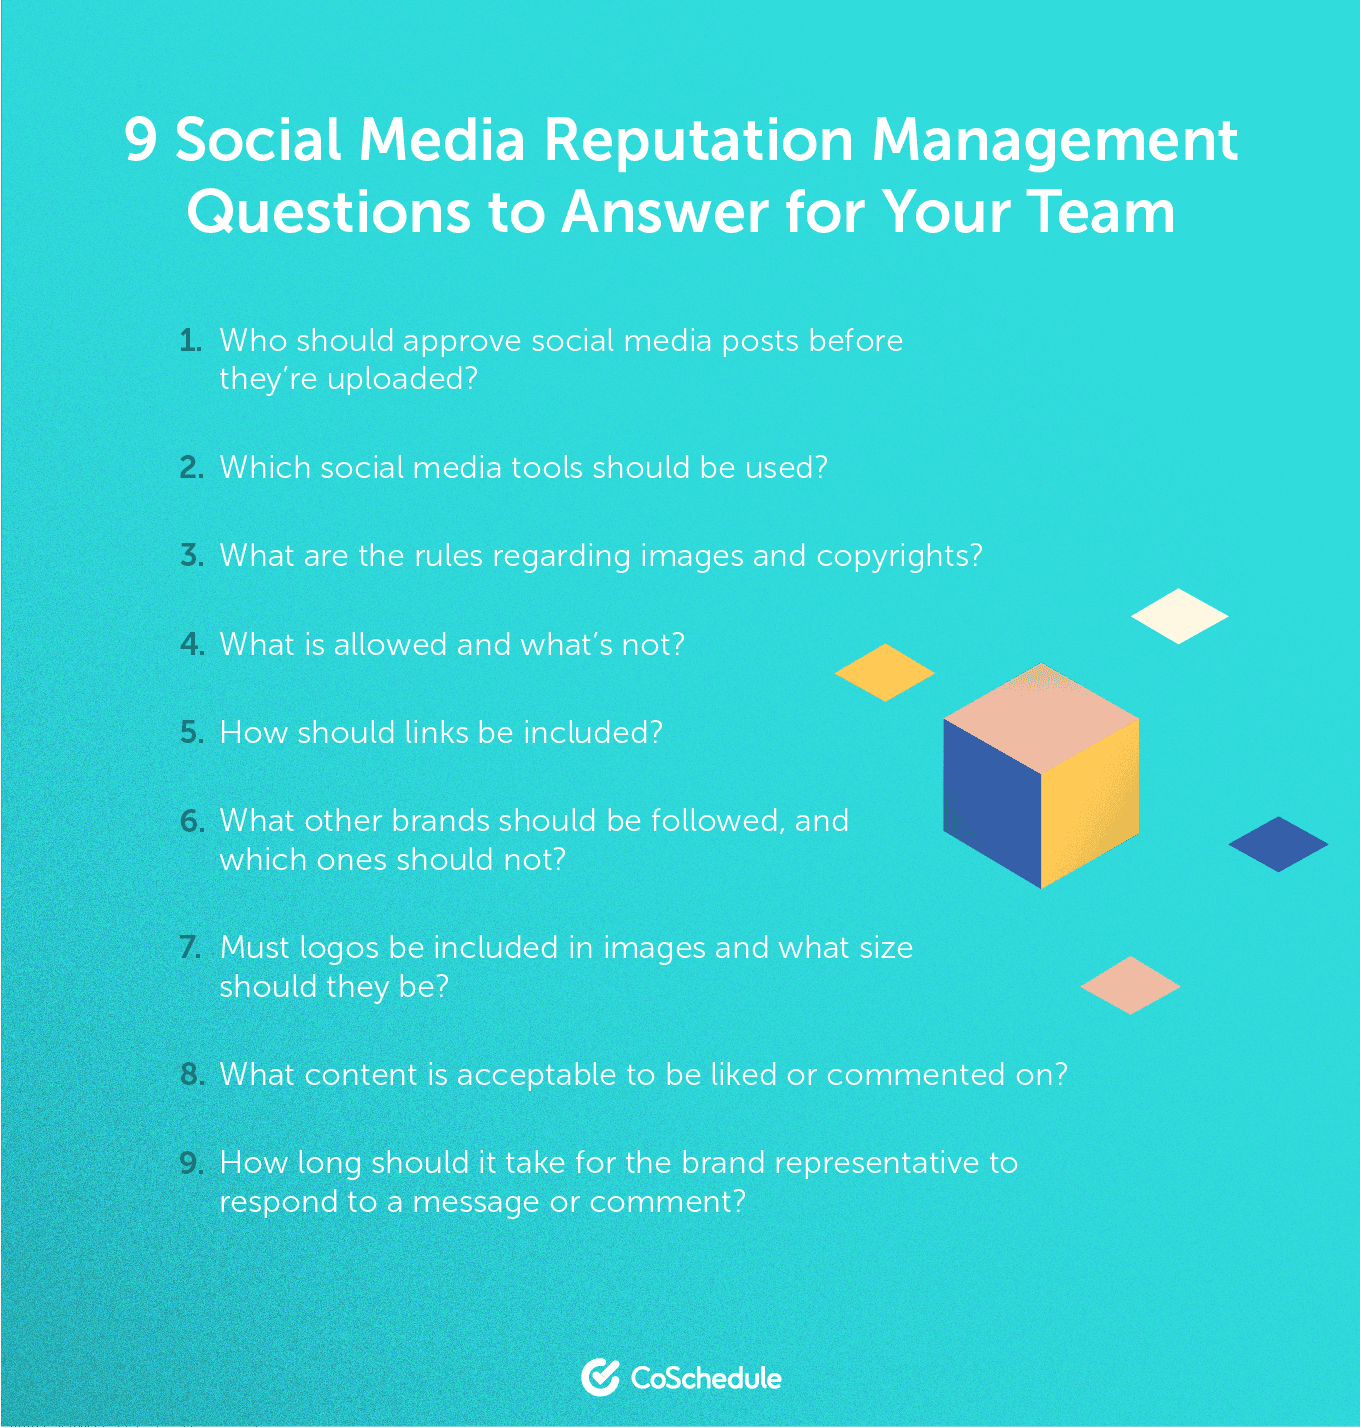 List of 9 questions about social media reputation management